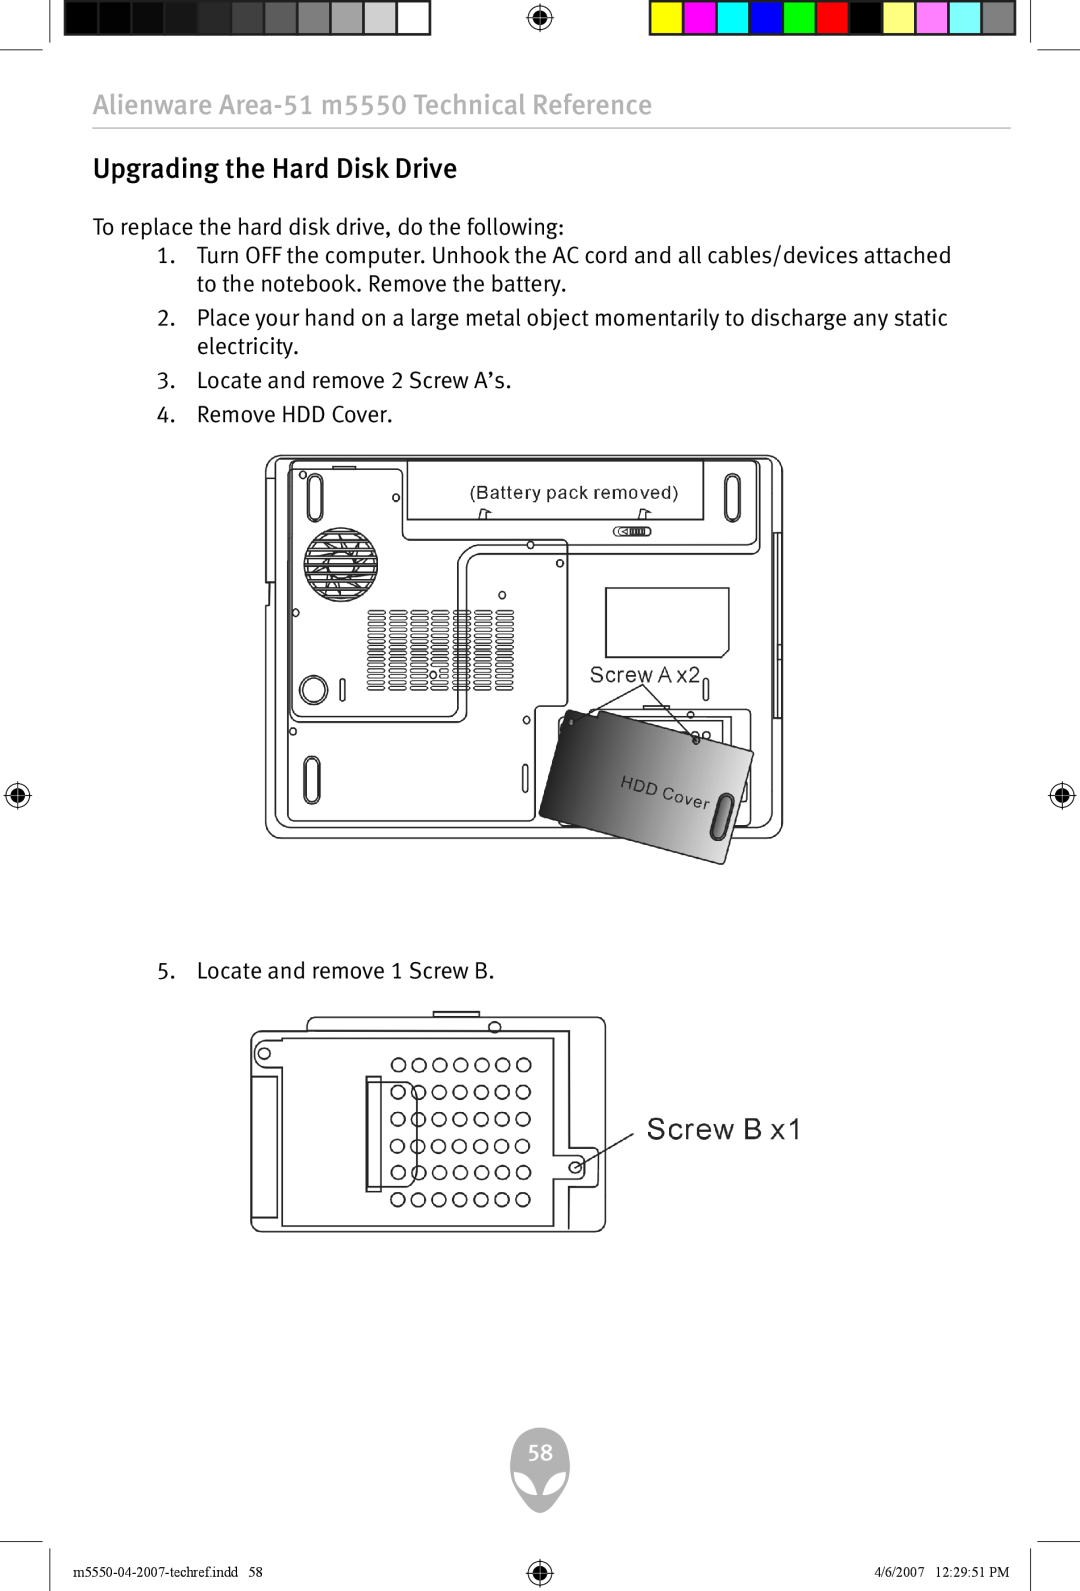 Alienware user manual Alienware Area-51 m5550 Technical Reference, Upgrading the Hard Disk Drive 